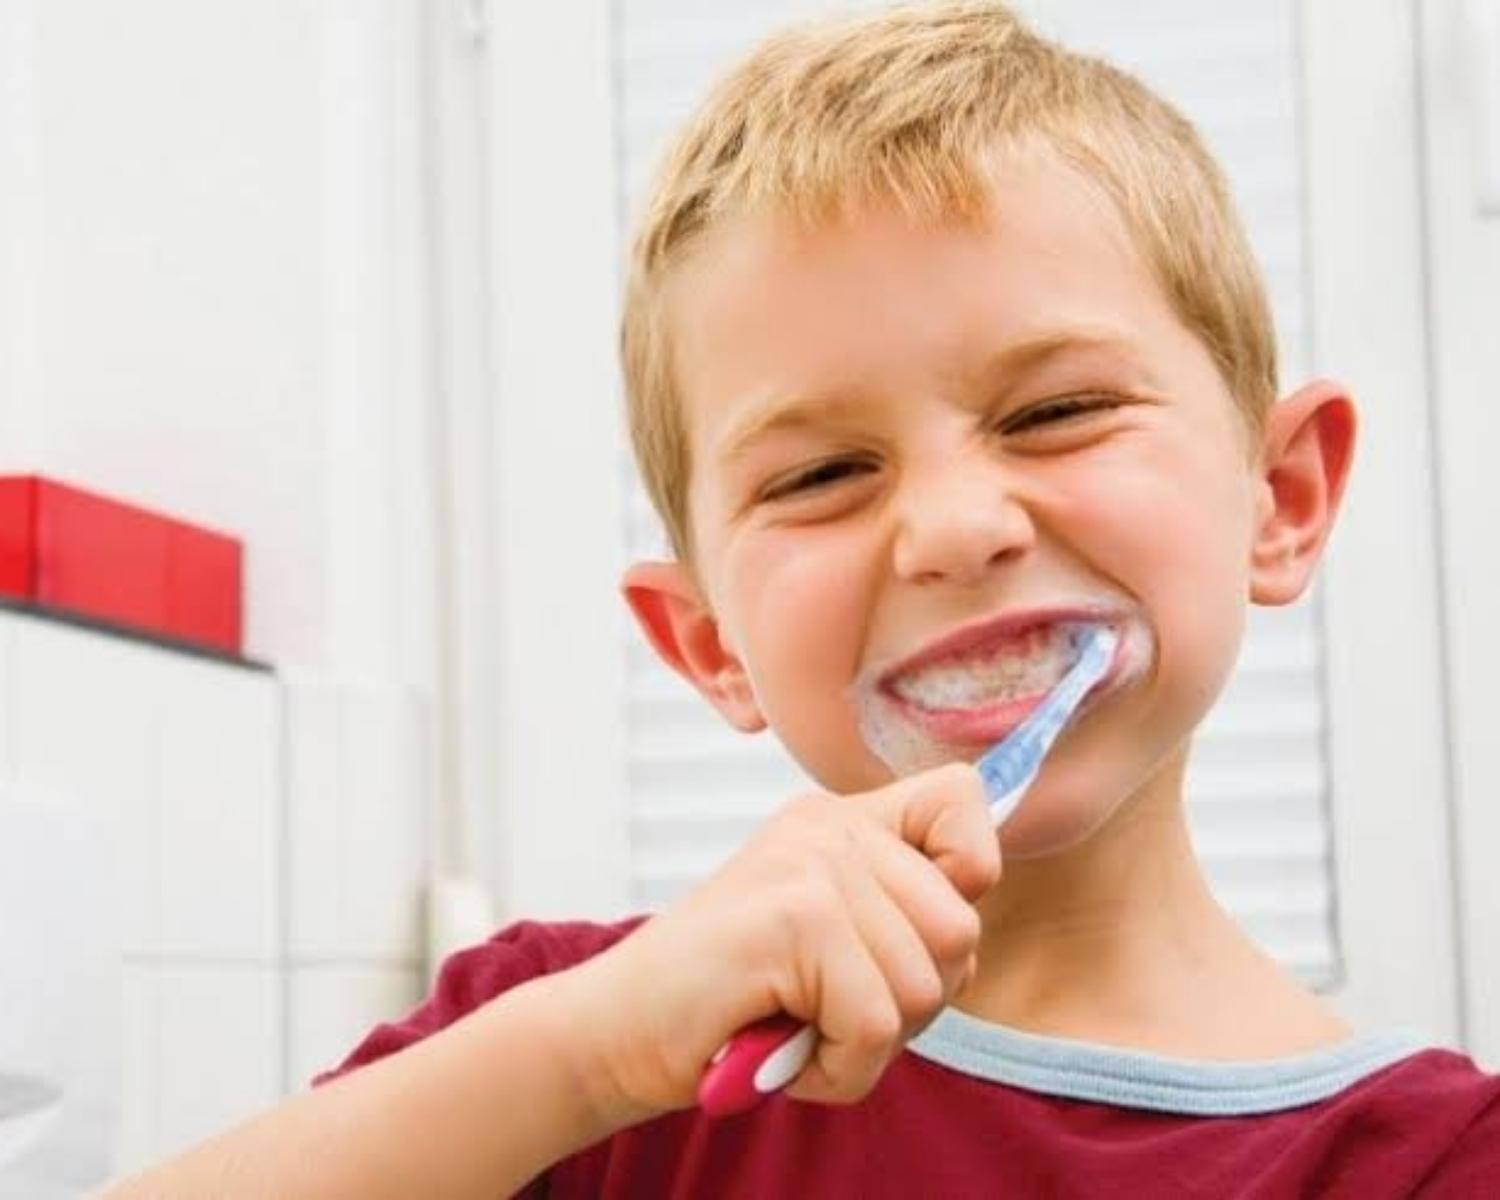 5.Brush Your Teeth … Mindfully